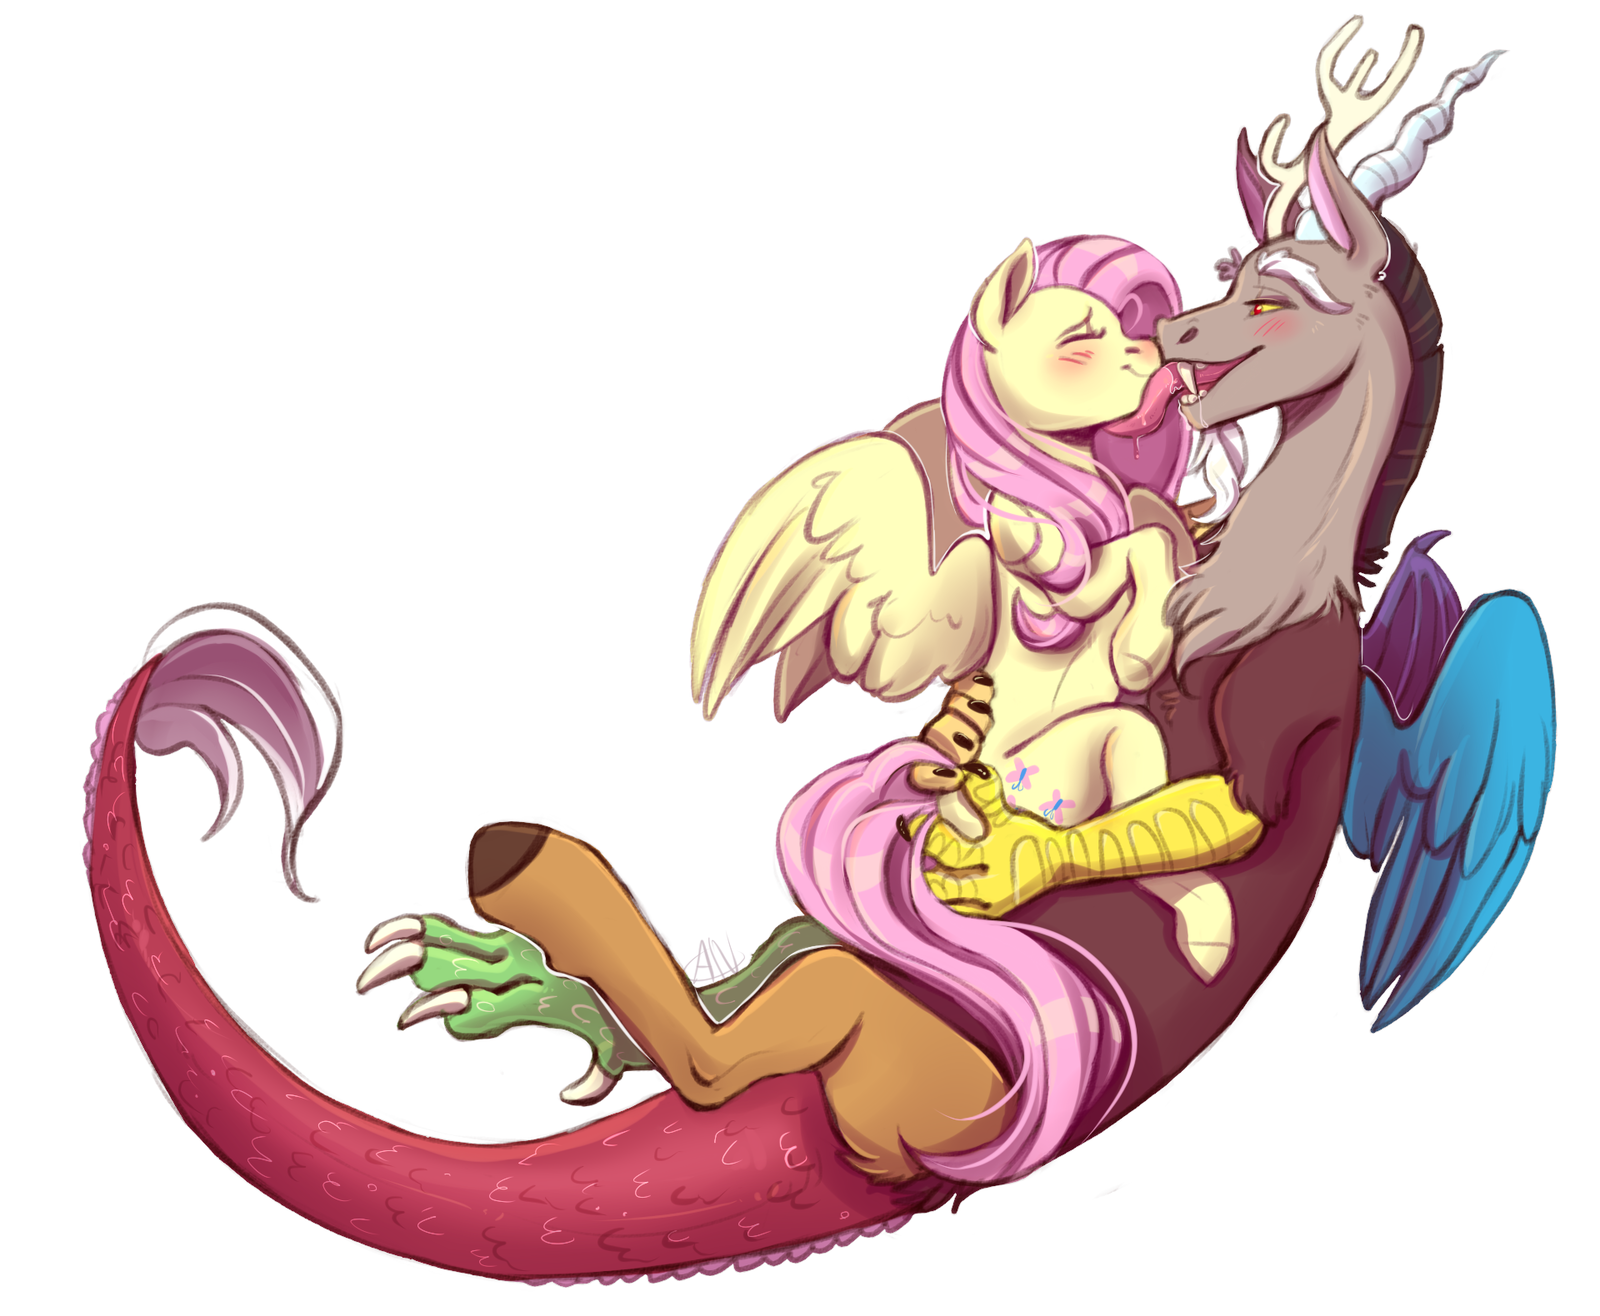 Fluttershy and Discord Пикабу. 